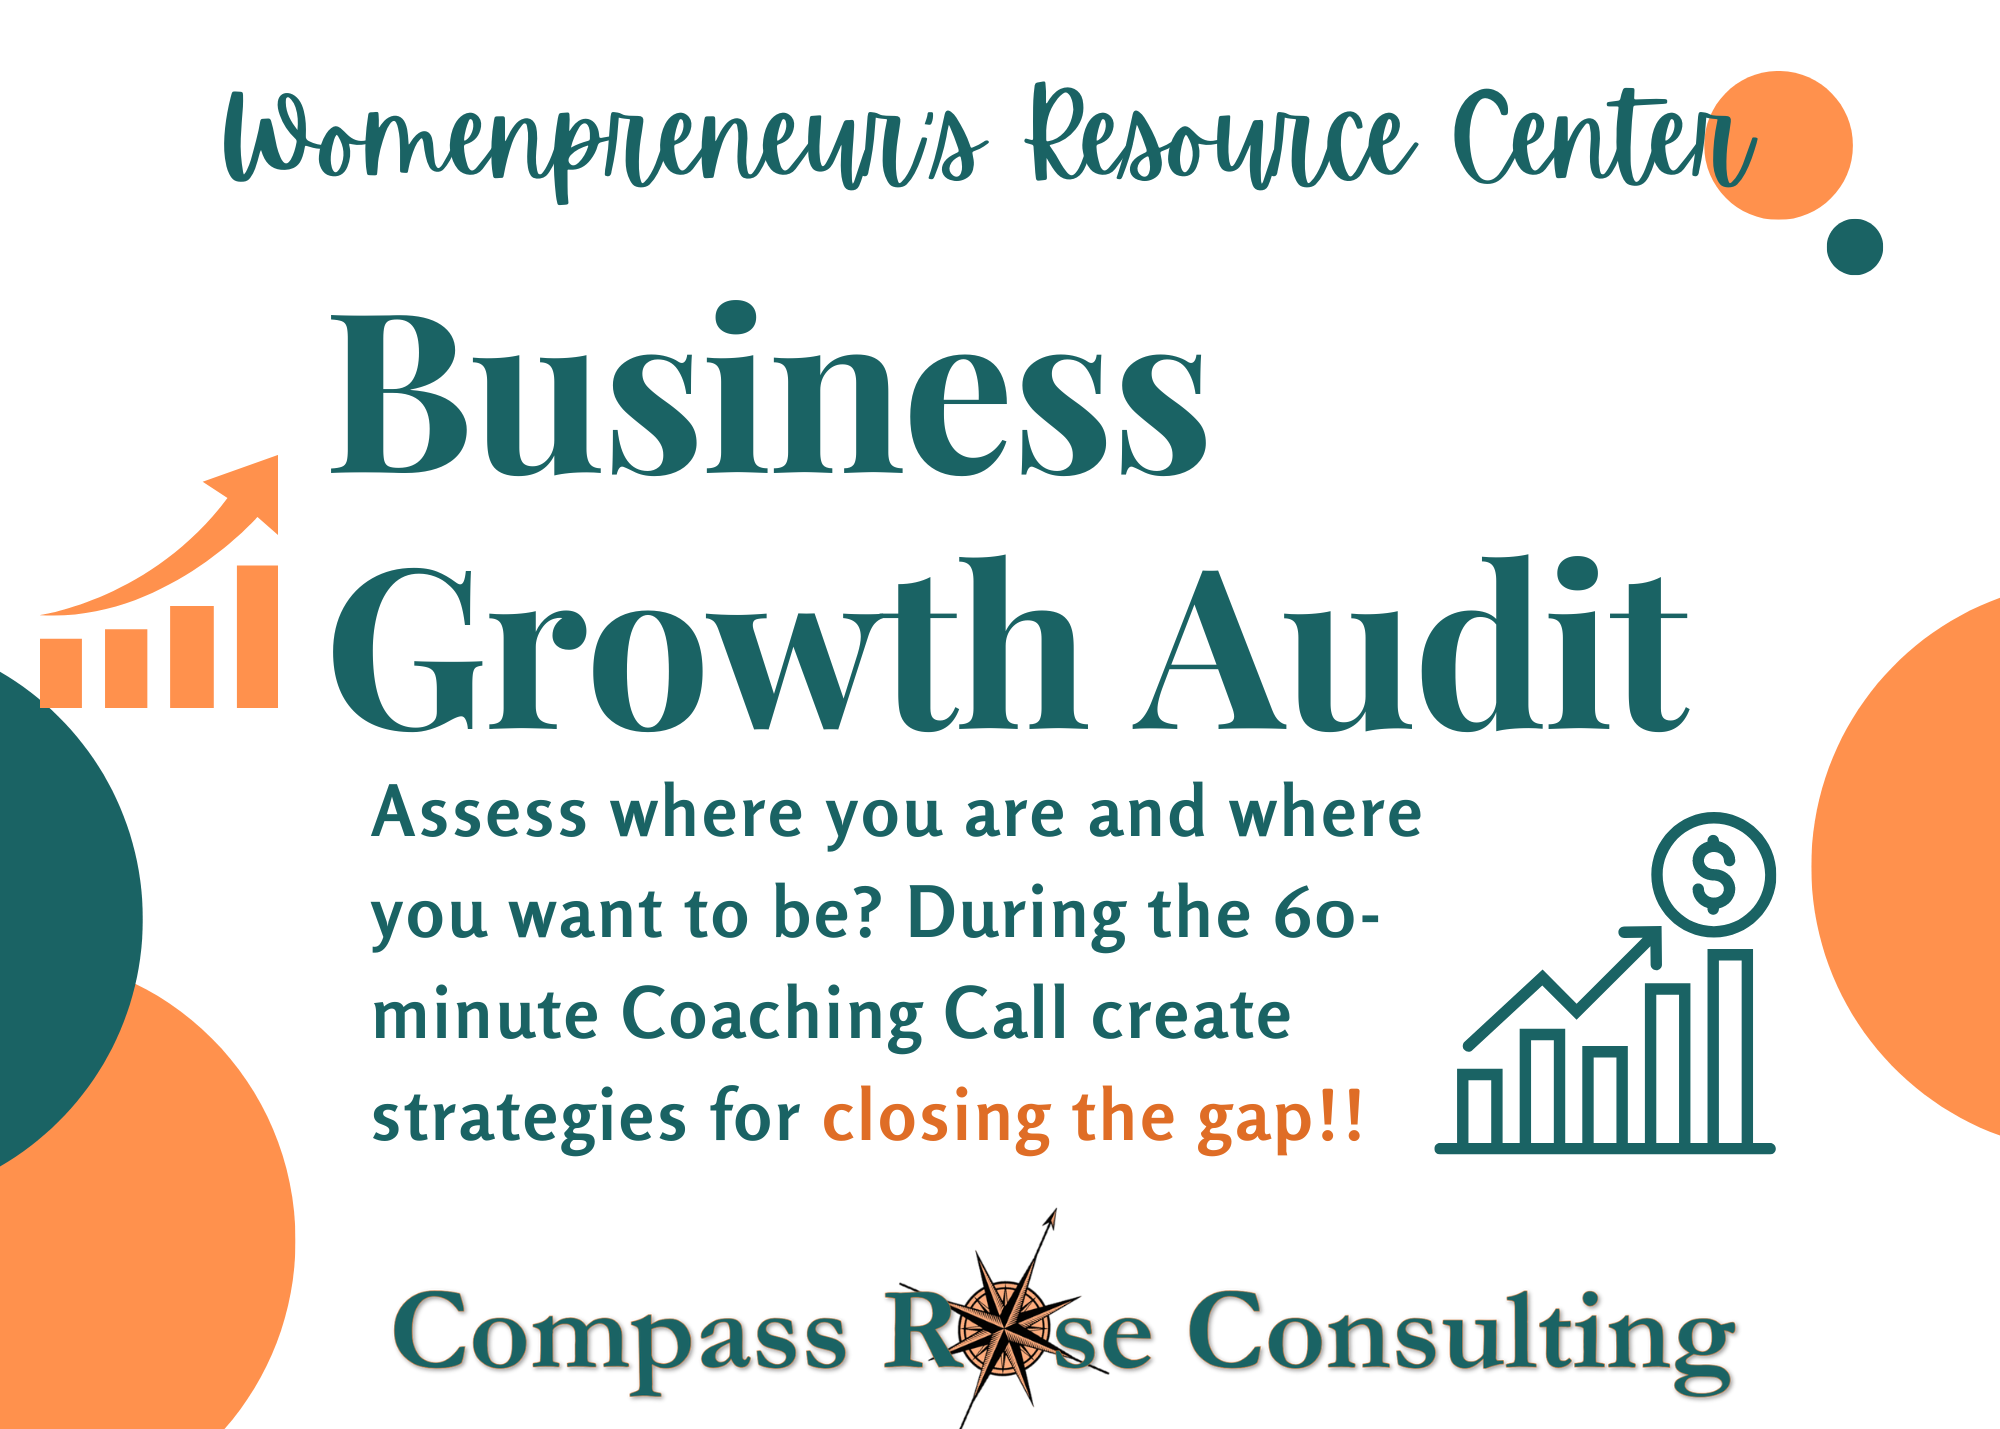 The Business Growth Audit